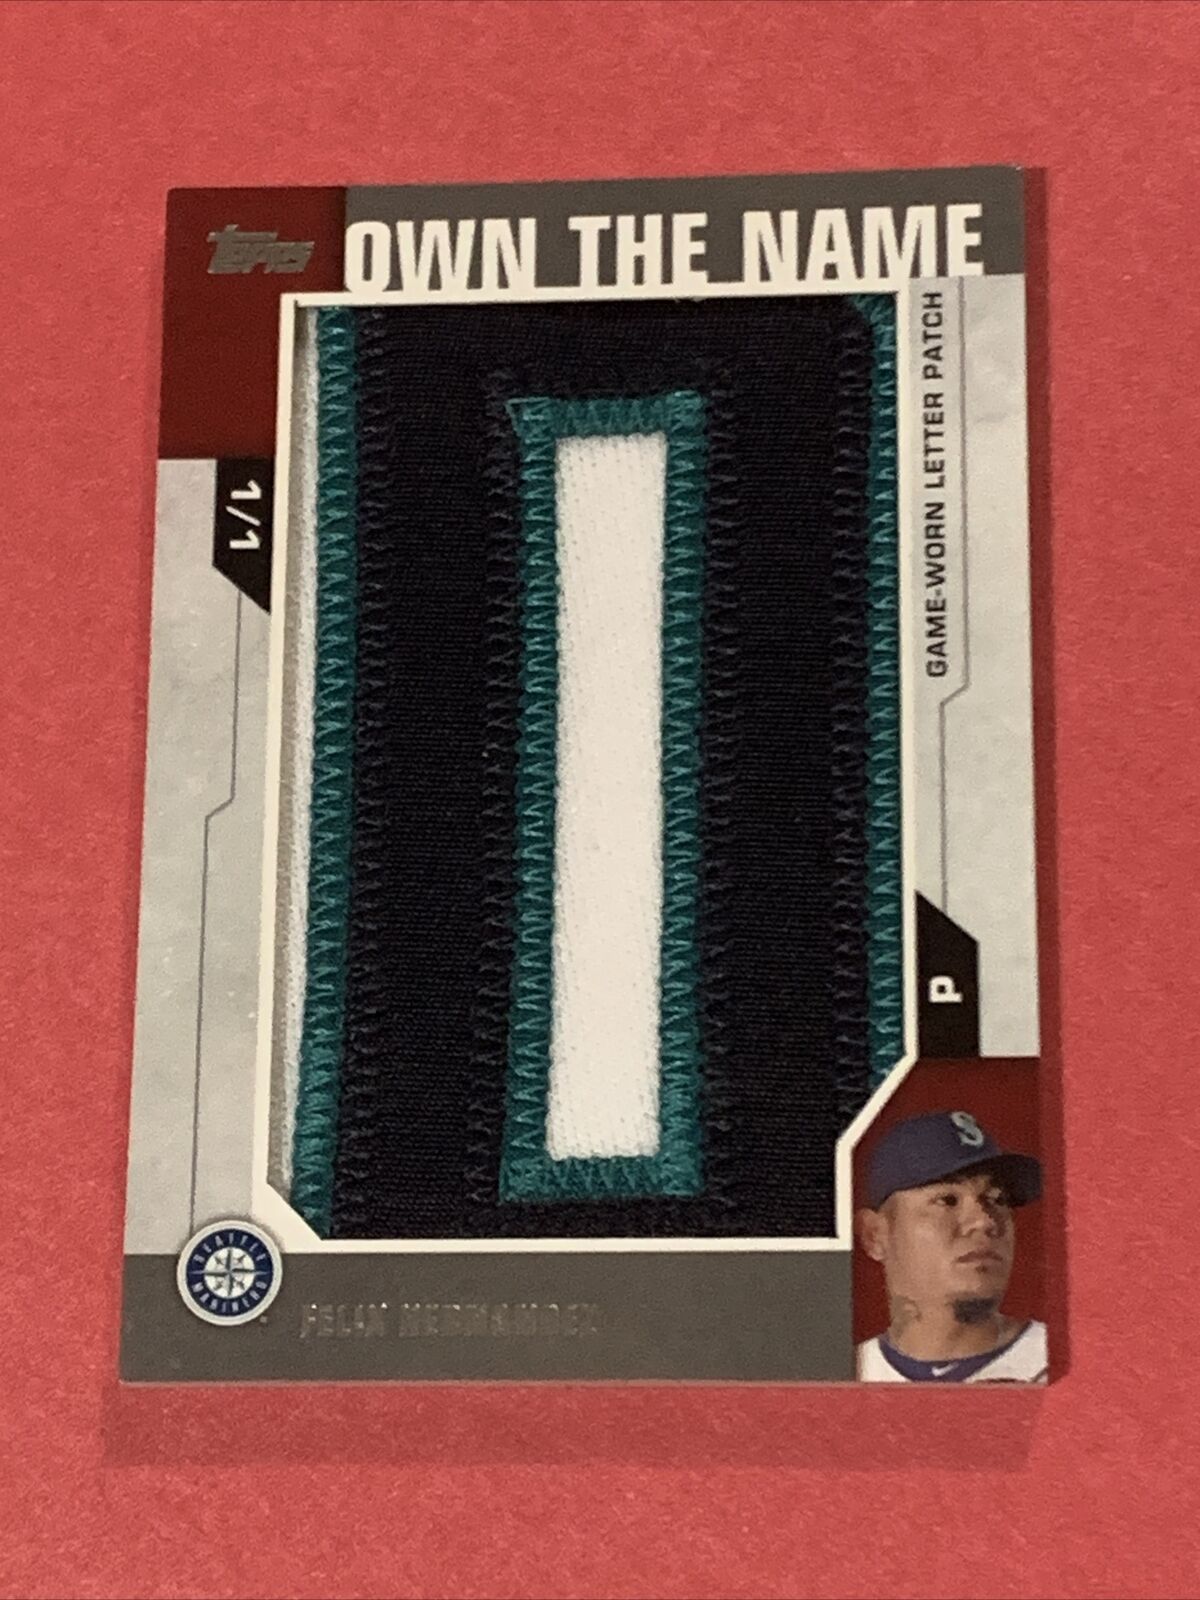 2014 Topps Series 2 Felix Hernandez Own The Game “D” 1/1 OTN-FH Seattle Mariners